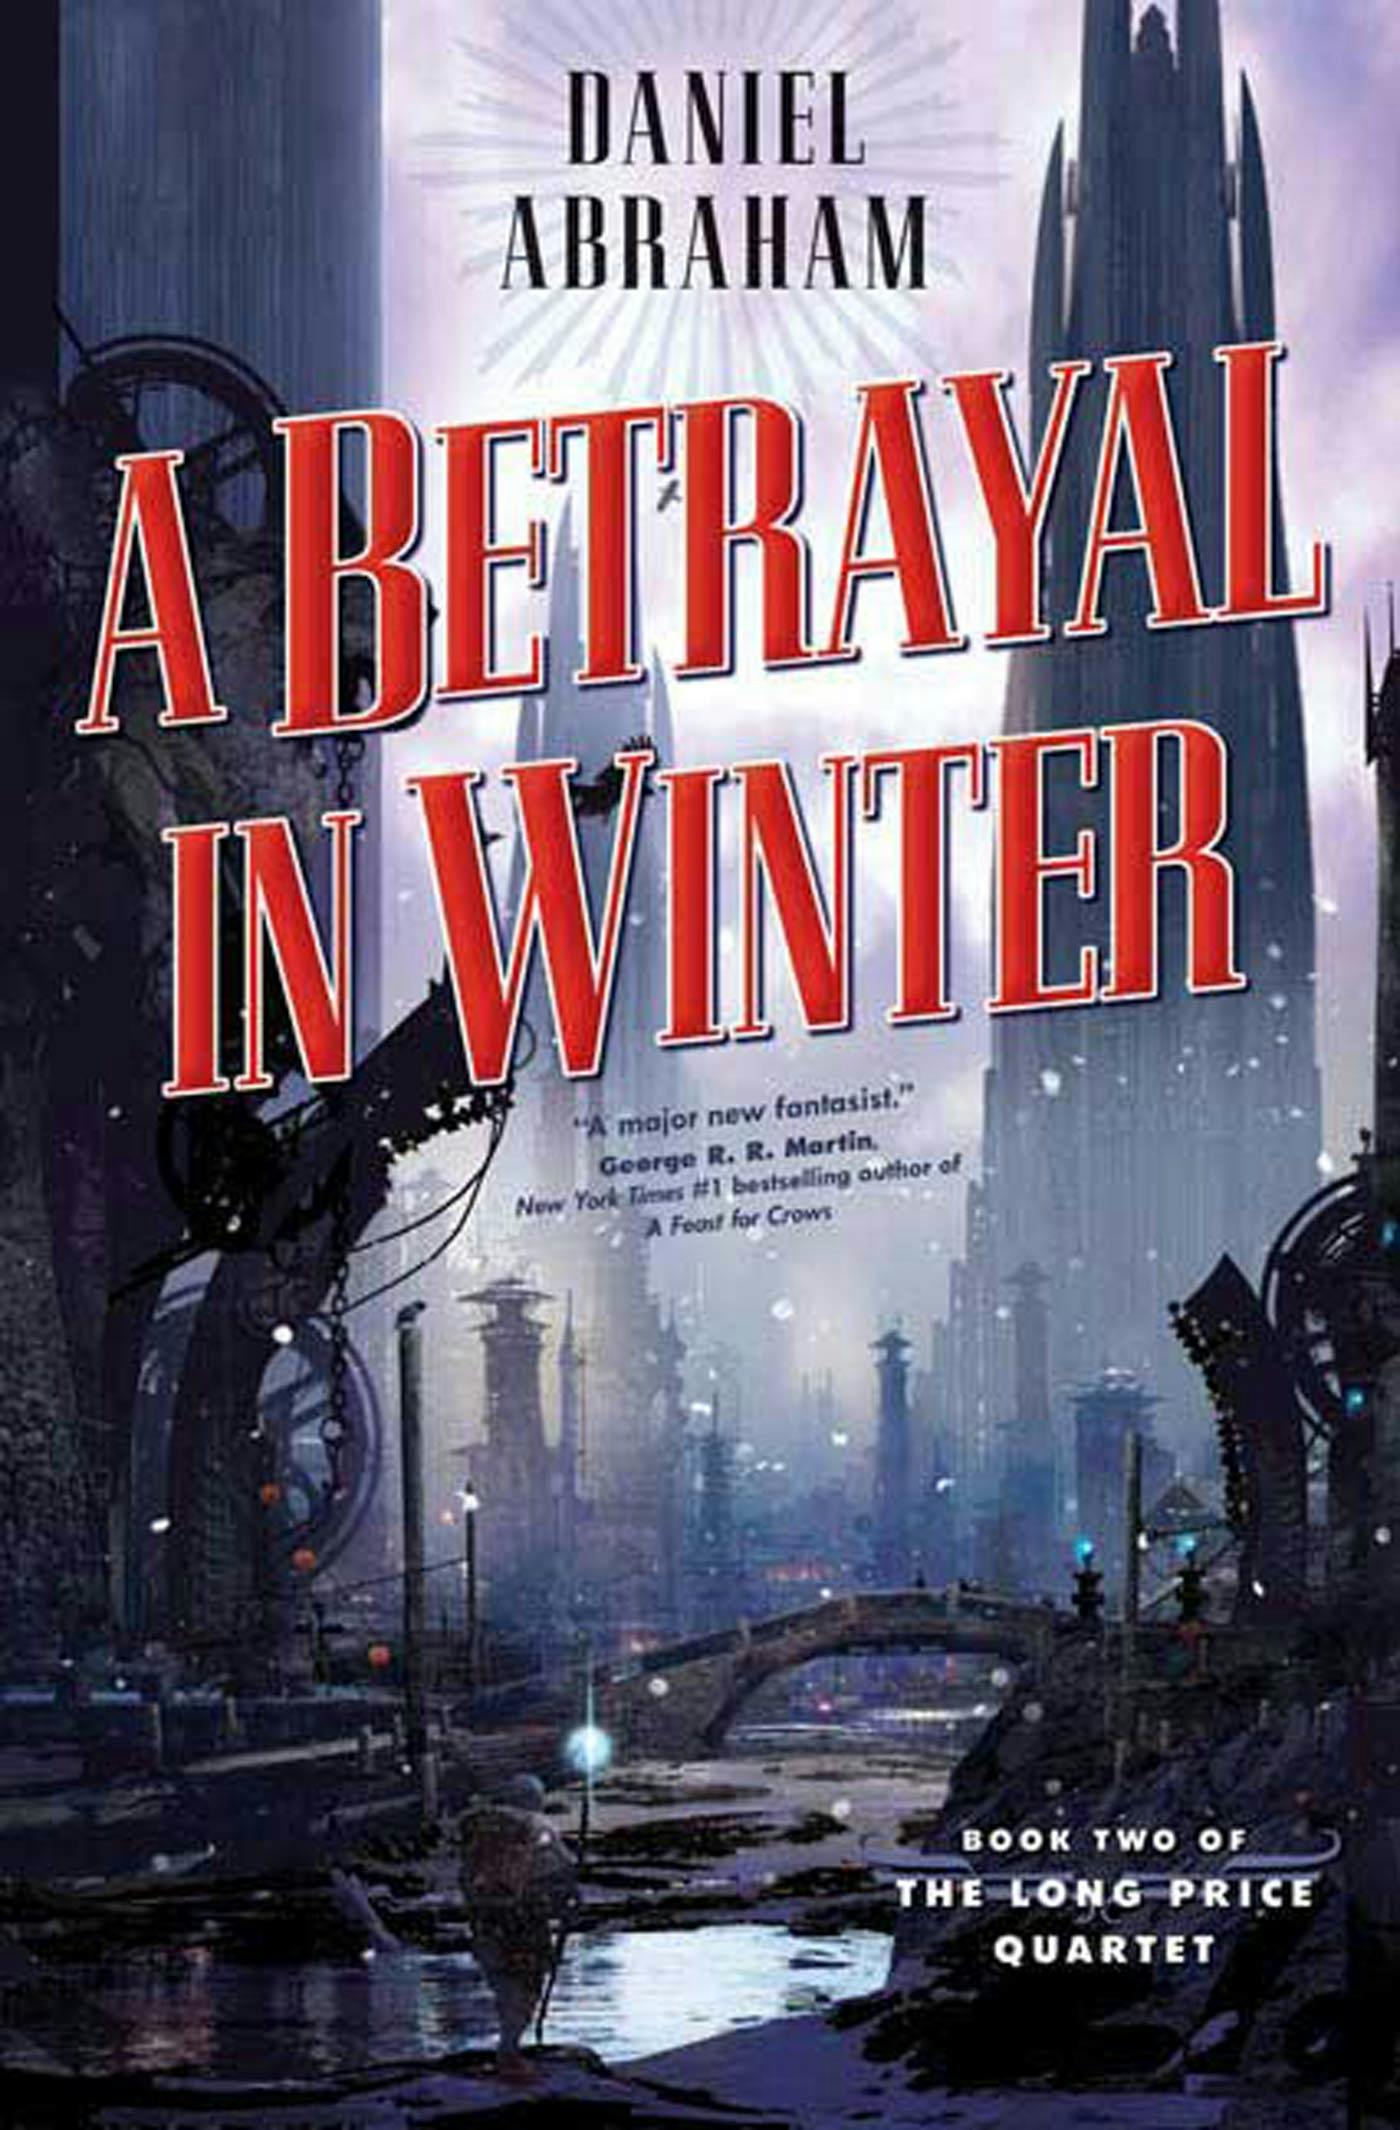 Cover for the book titled as: A Betrayal in Winter